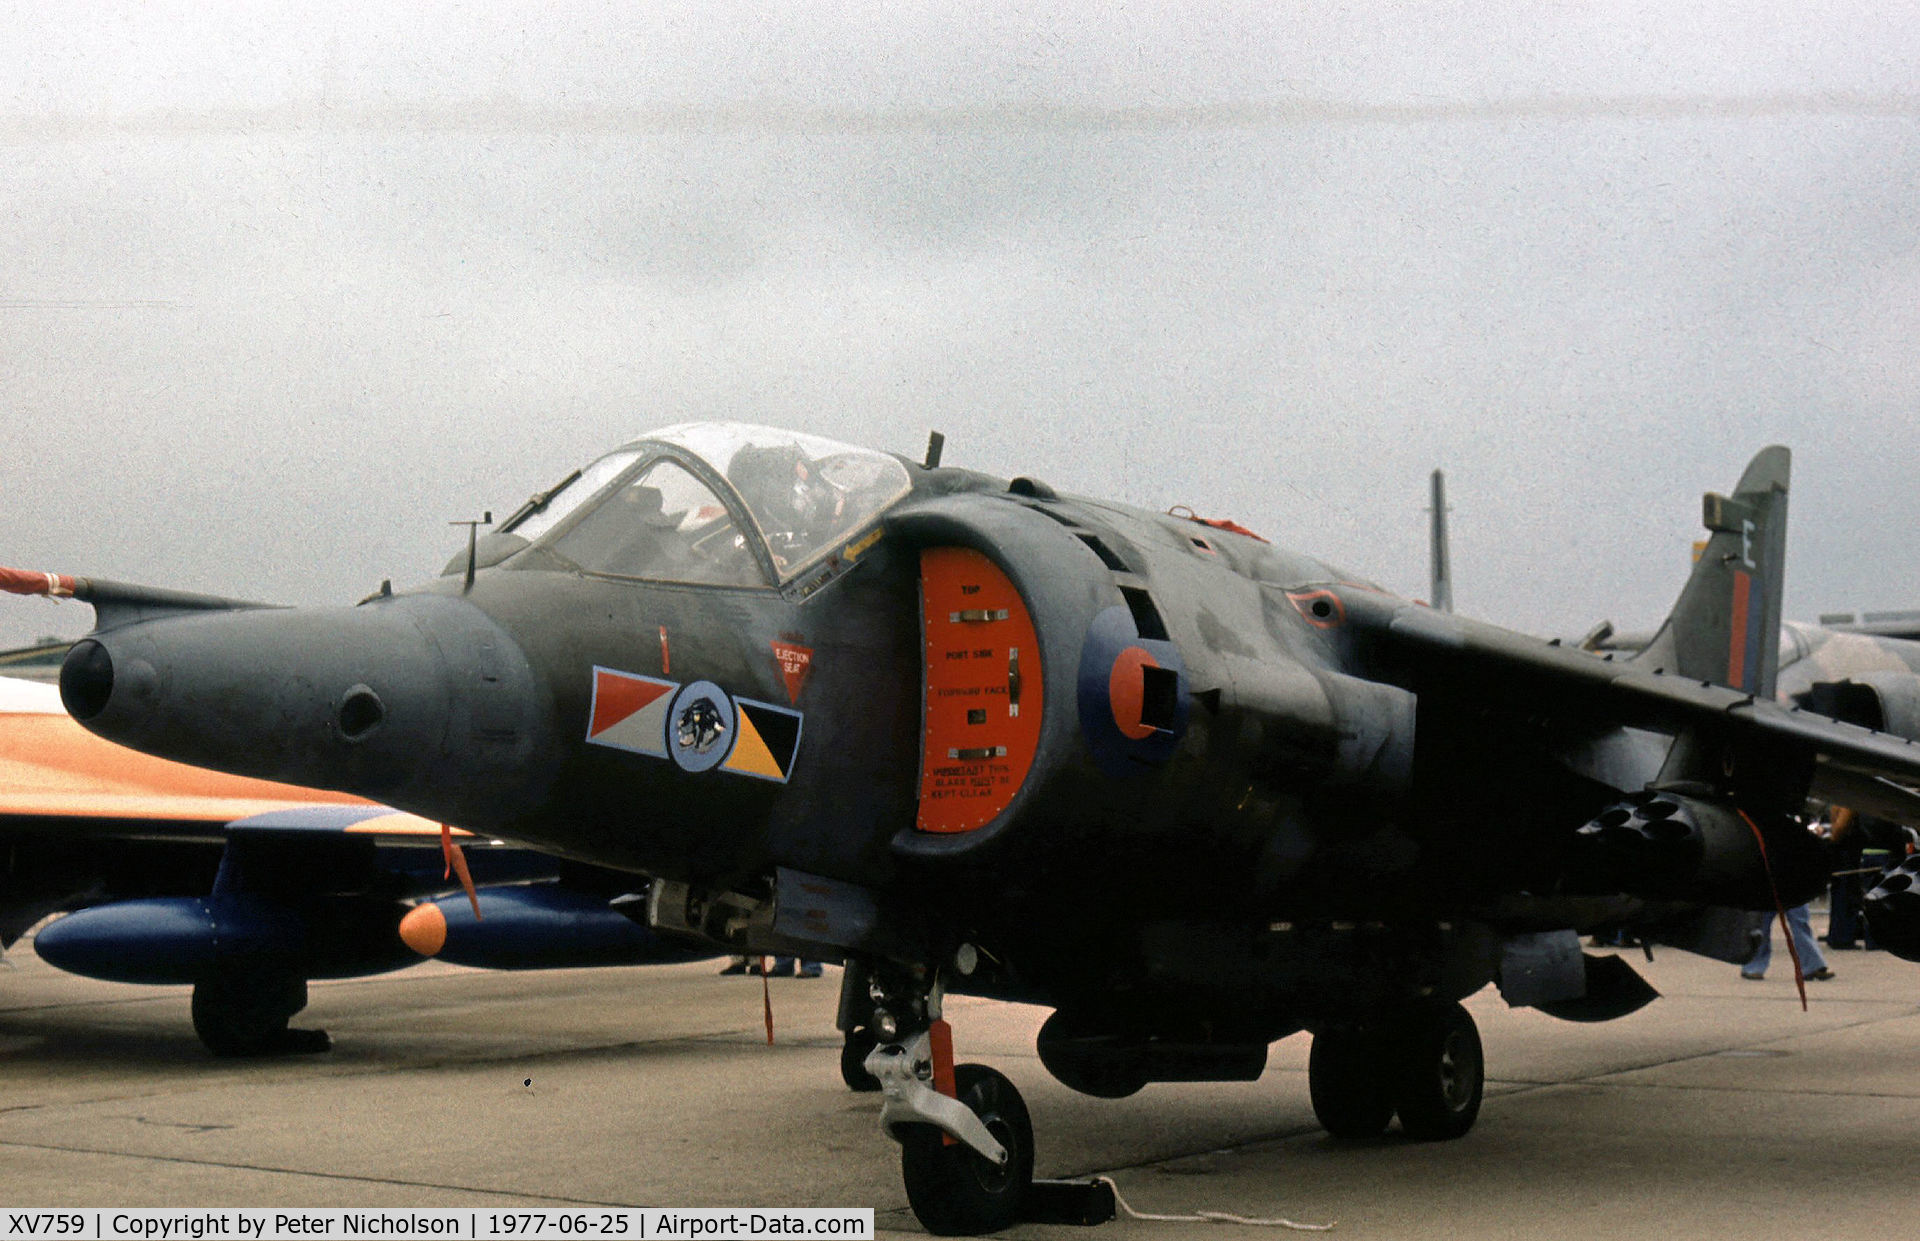 XV759, 1969 Hawker Siddeley Harrier GR.3 C/N 712022, Harrier GR.3 of 230 Operational Conversion Unit at RAF Wittering on display at the 1977 International Air Tattoo at RAF Greenham Common, Berkshire.